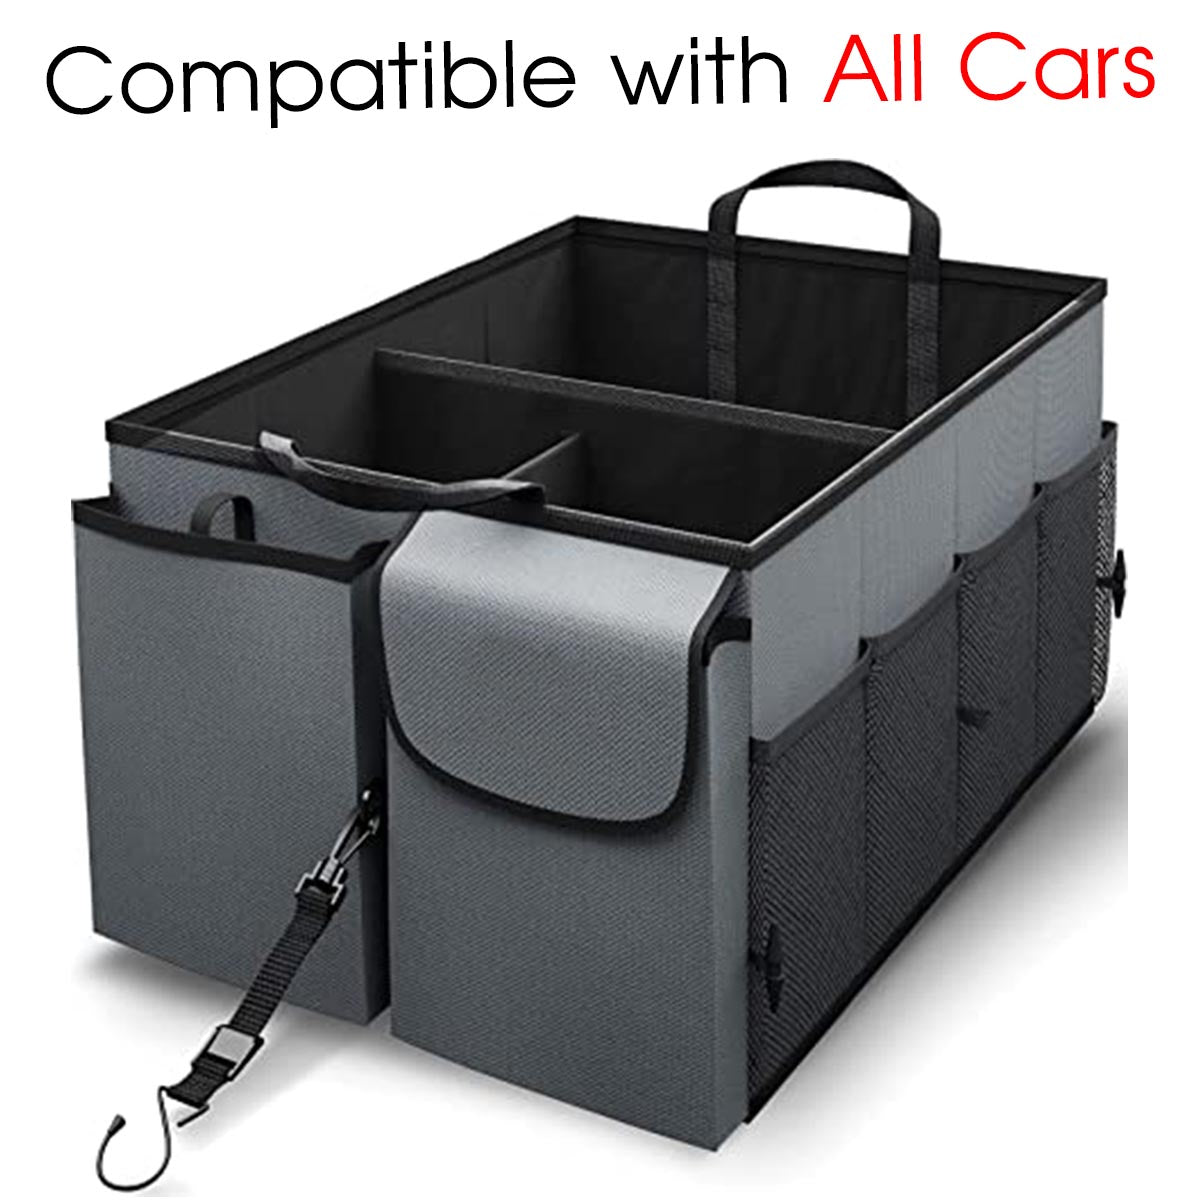 Car Trunk Organizer - Collapsible, Custom fit for All Cars, Multi-Compartment Automotive SUV Car Organizer for Storage w/ Adjustable Straps - Car Accessories for Women and Men AR12993